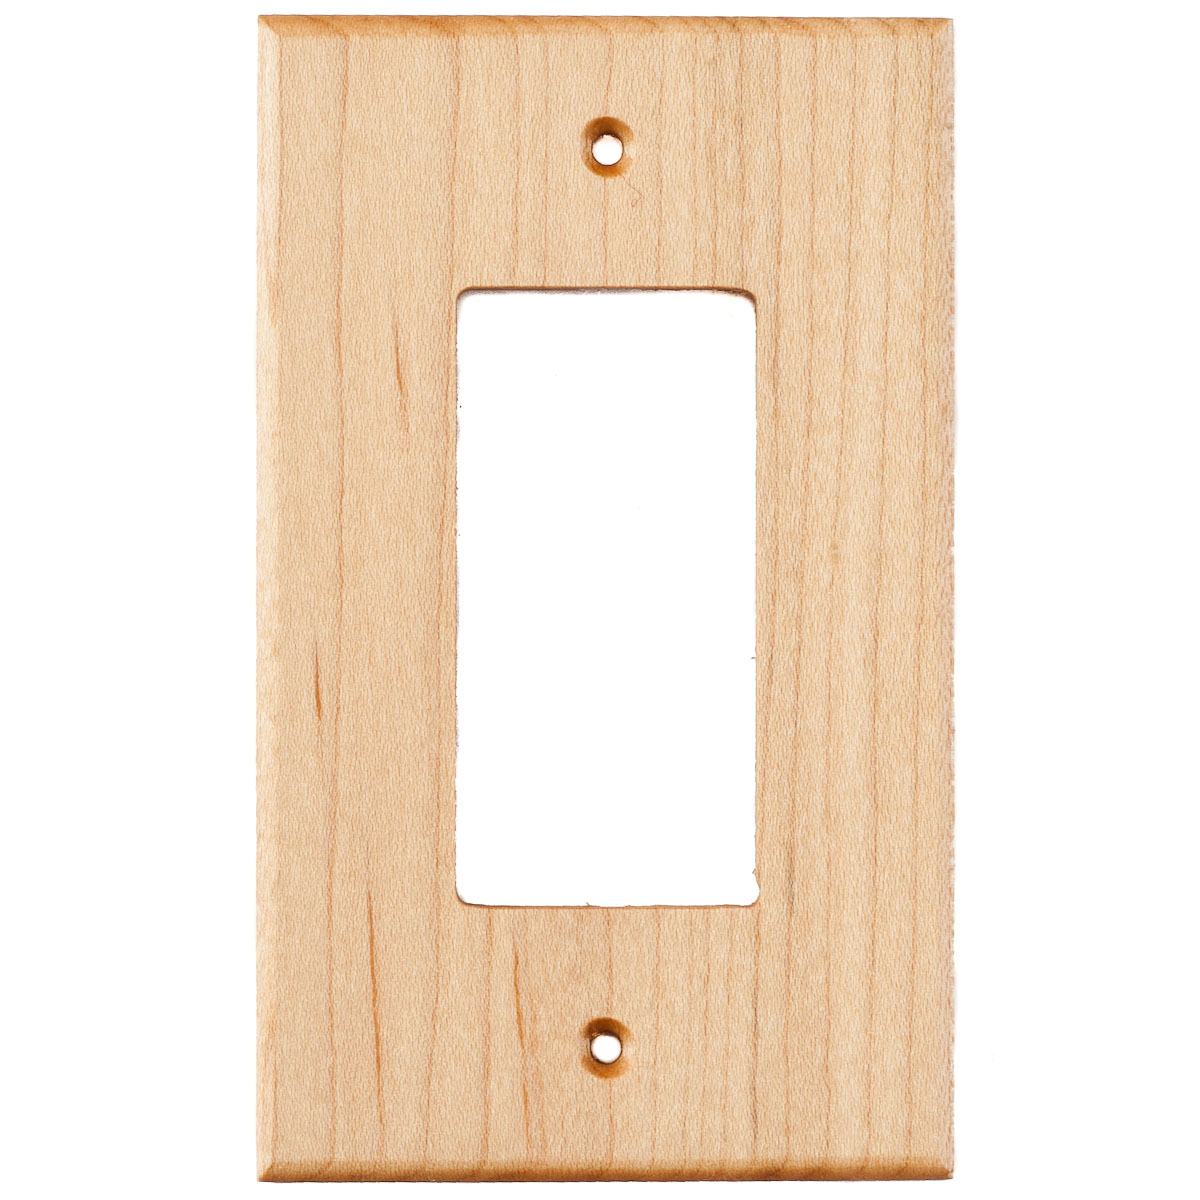 Maple Wood Wall Plate - 1 Gang GFCI Outlet Cover - Virgin Timber Lumber